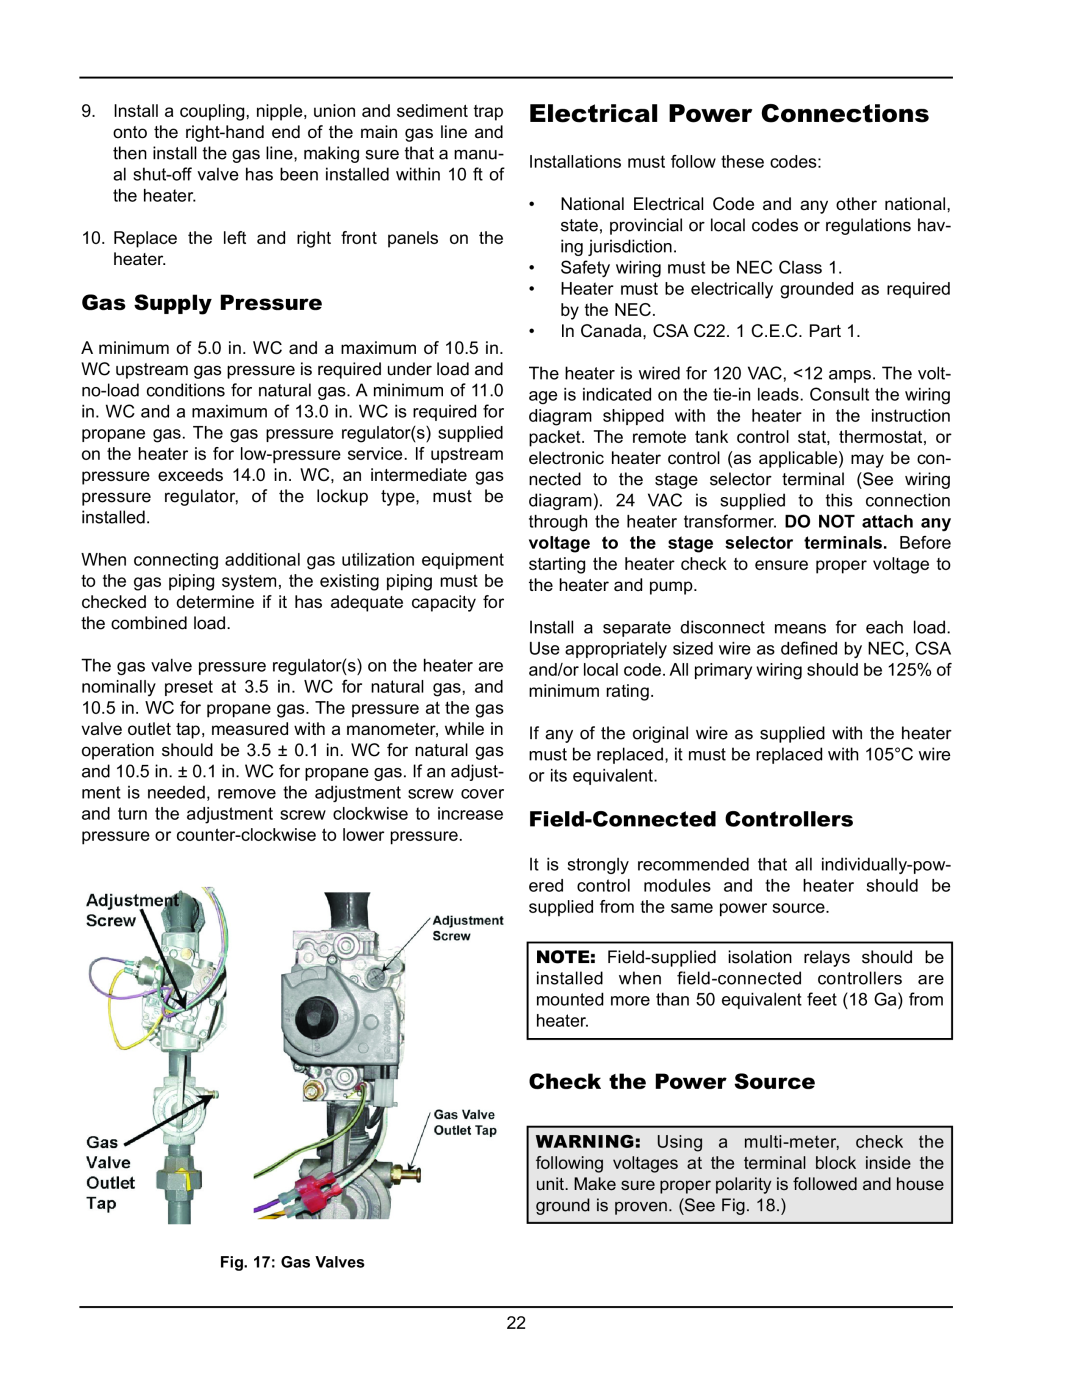 Raypak 992B-1262B Electrical Power Connections, Gas Supply Pressure, Field-ConnectedControllers, Check the Power Source 